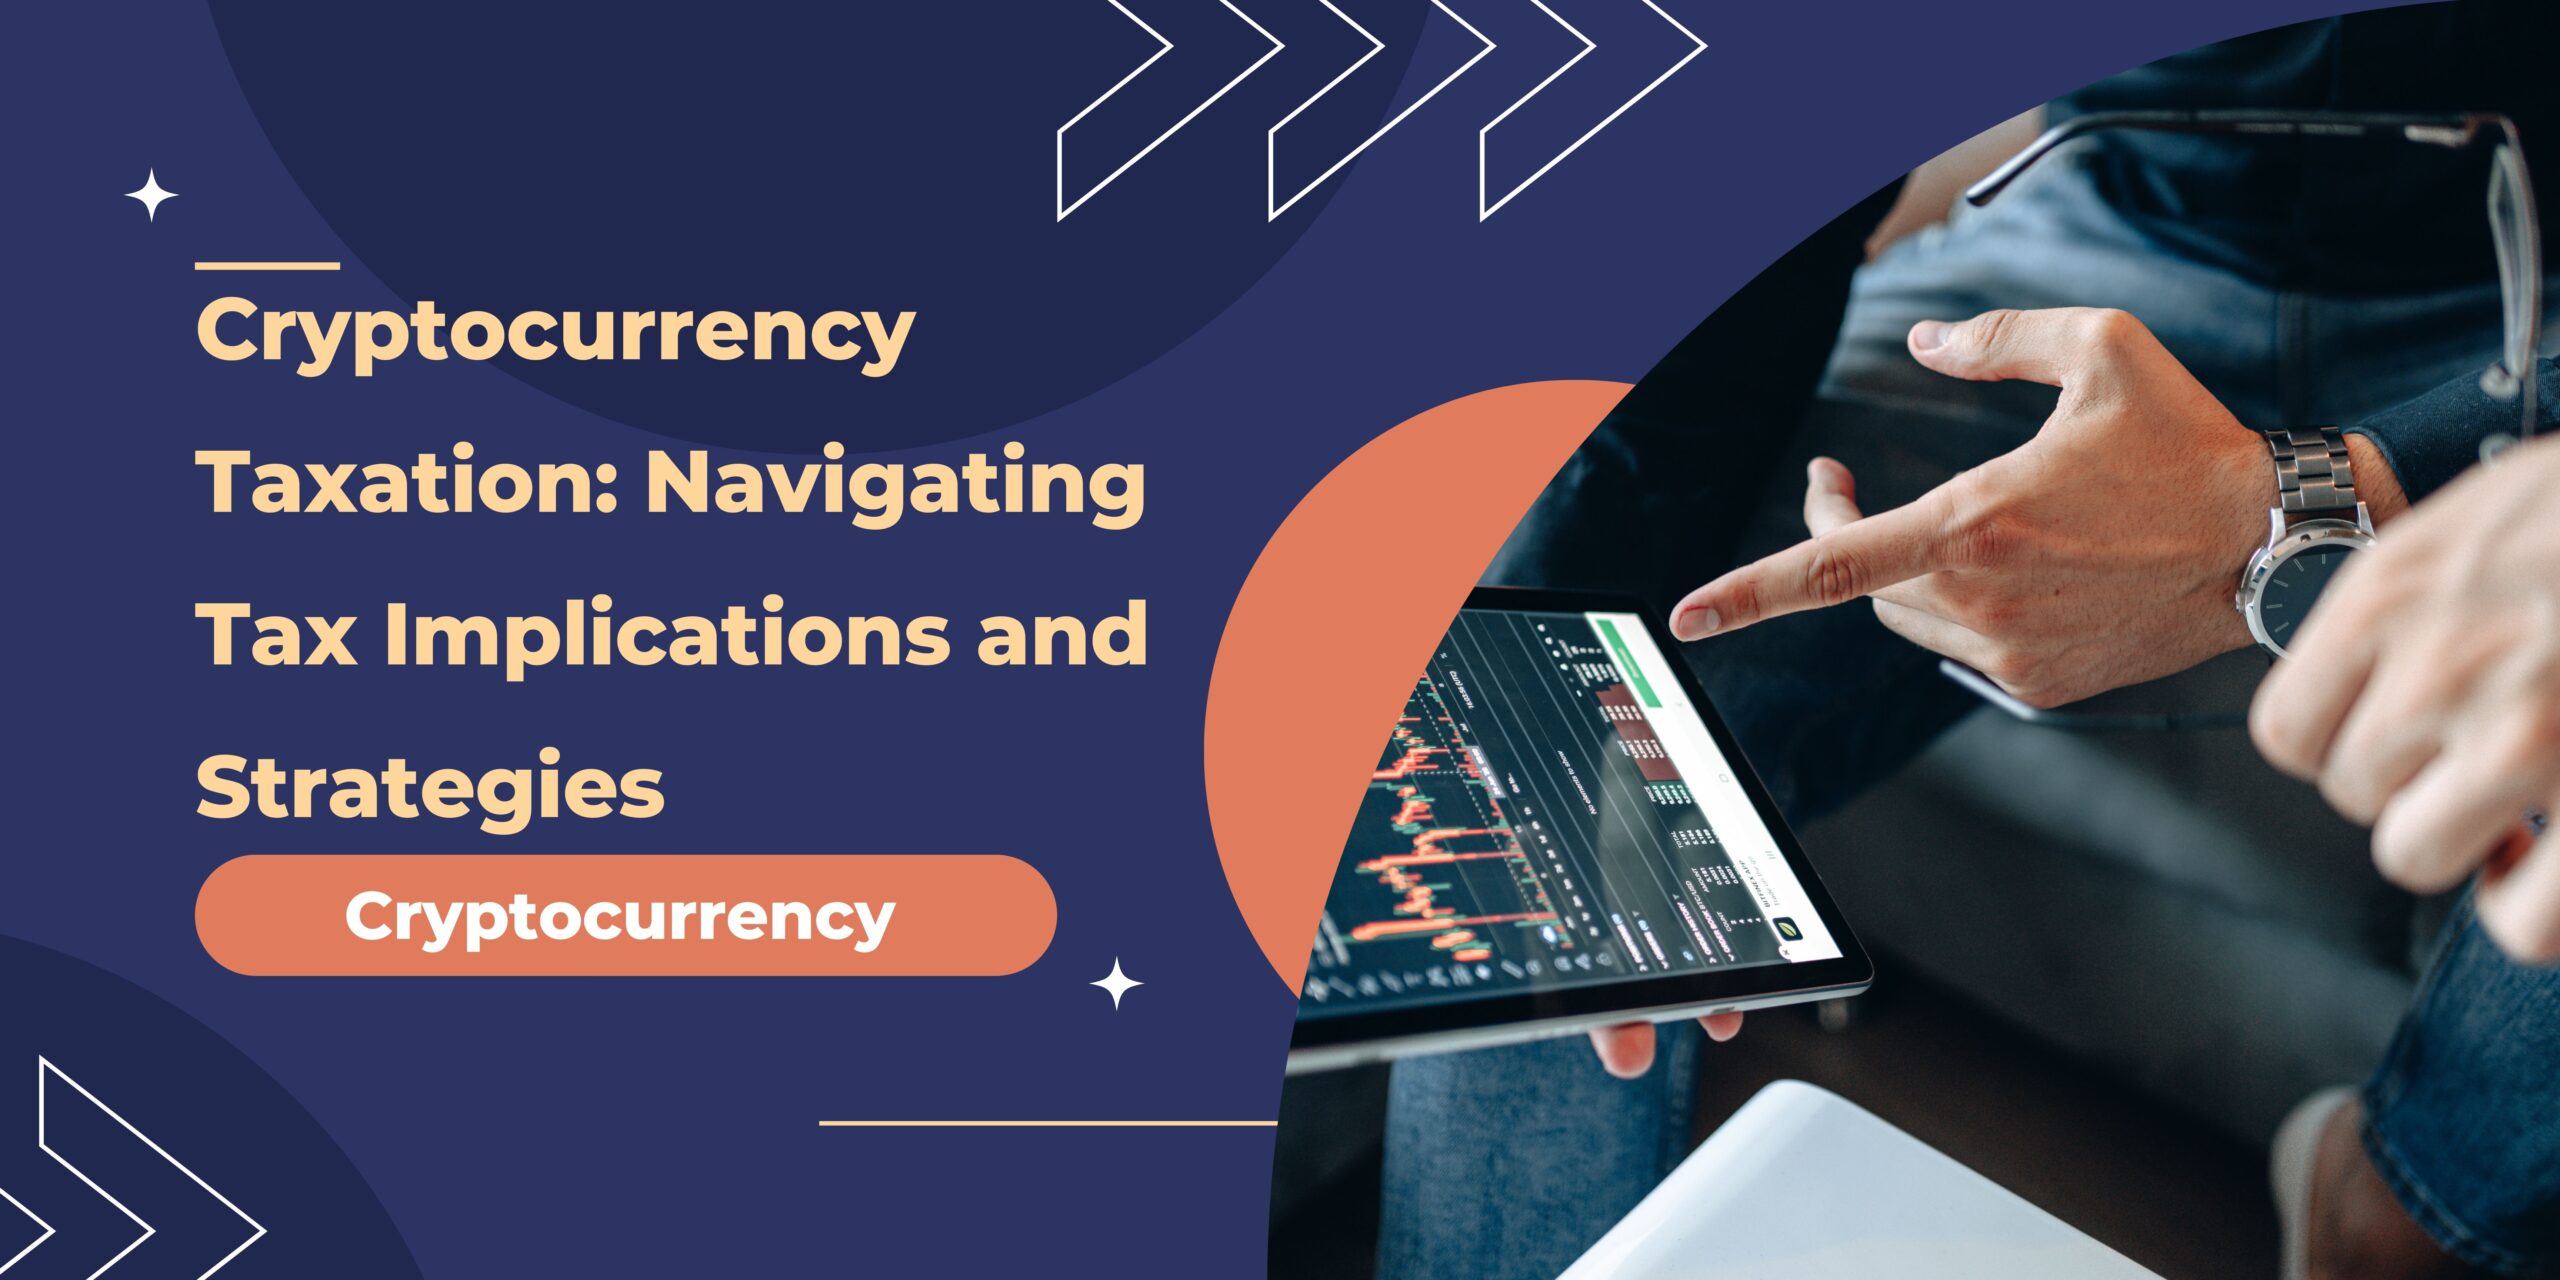 Cryptocurrency Taxation: Navigating Tax Implications and Strategies